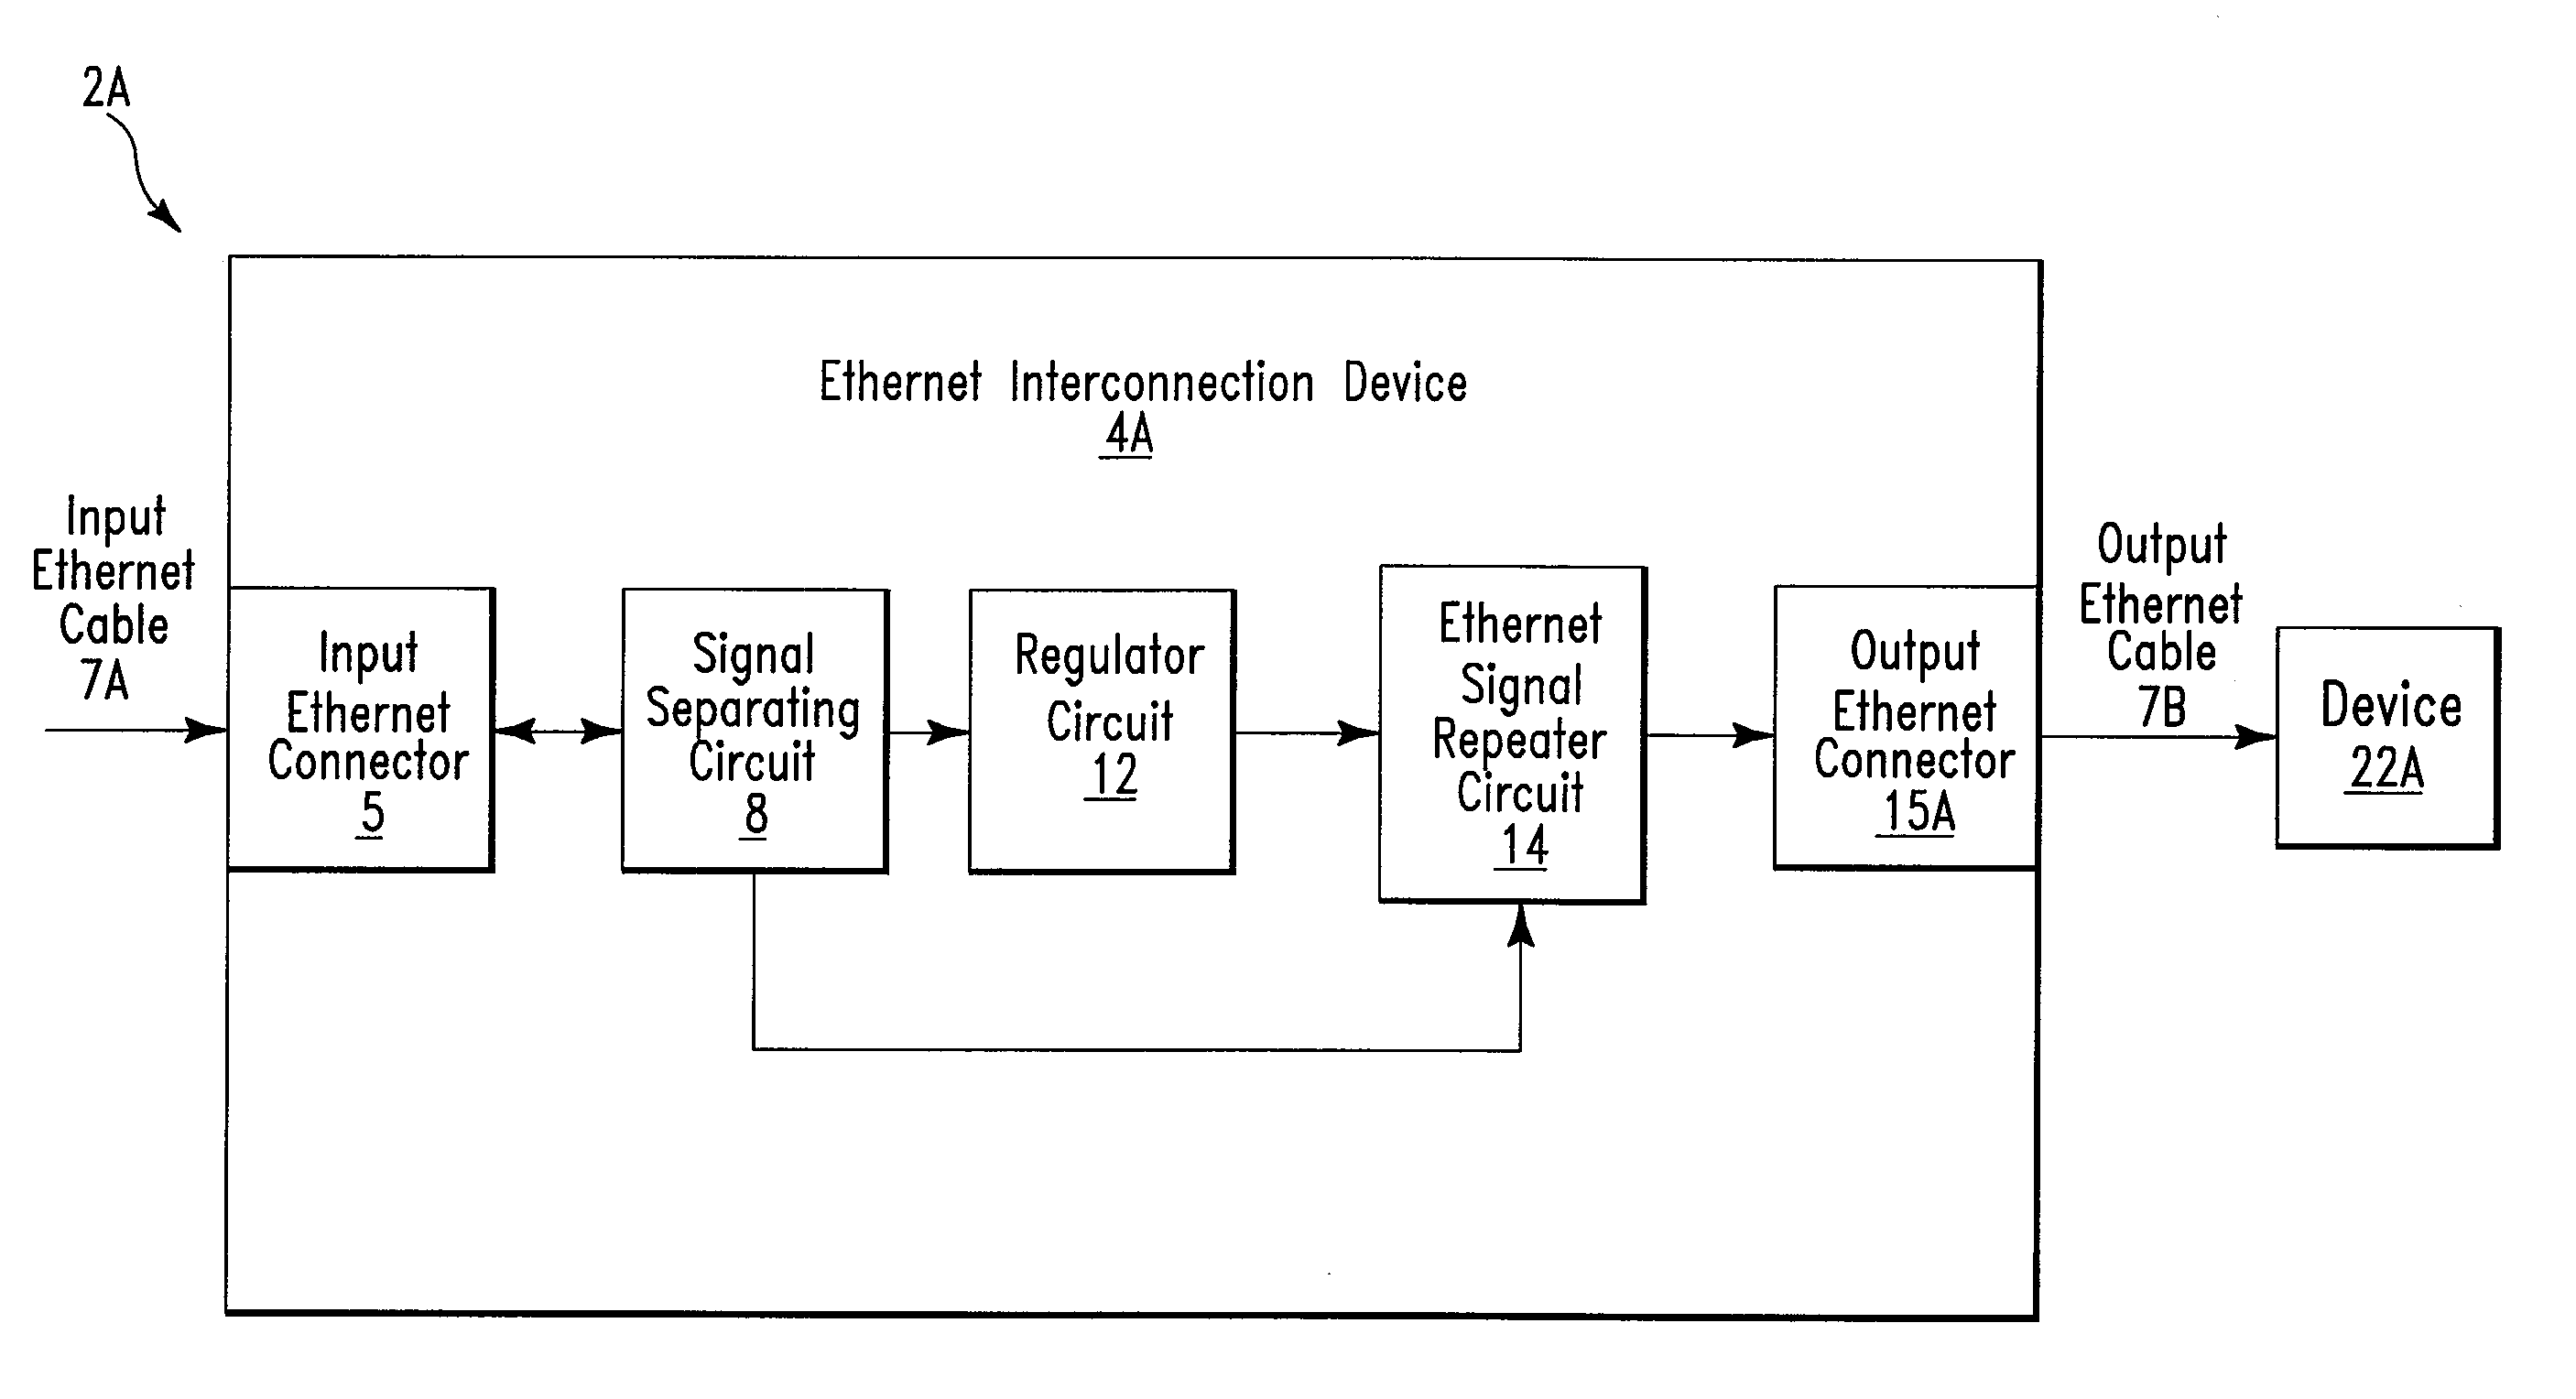 Ethernet interconnection apparatus and method